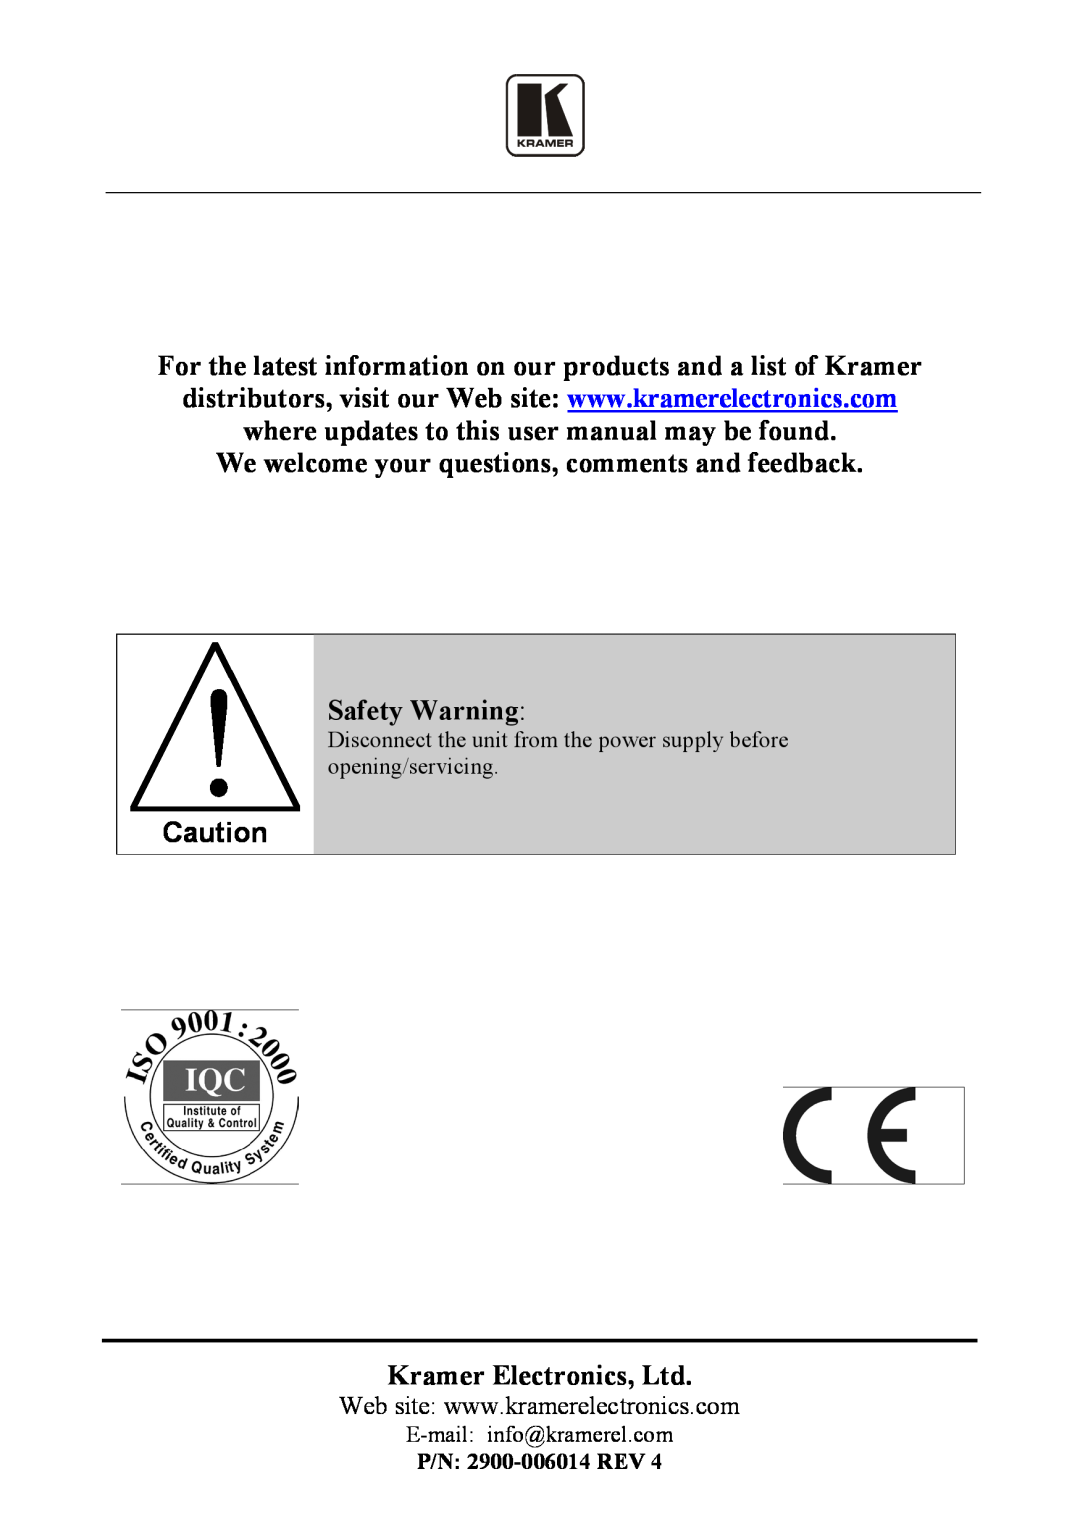 Kramer Electronics 903 user manual We welcome your questions, comments and feedback, Safety Warning 